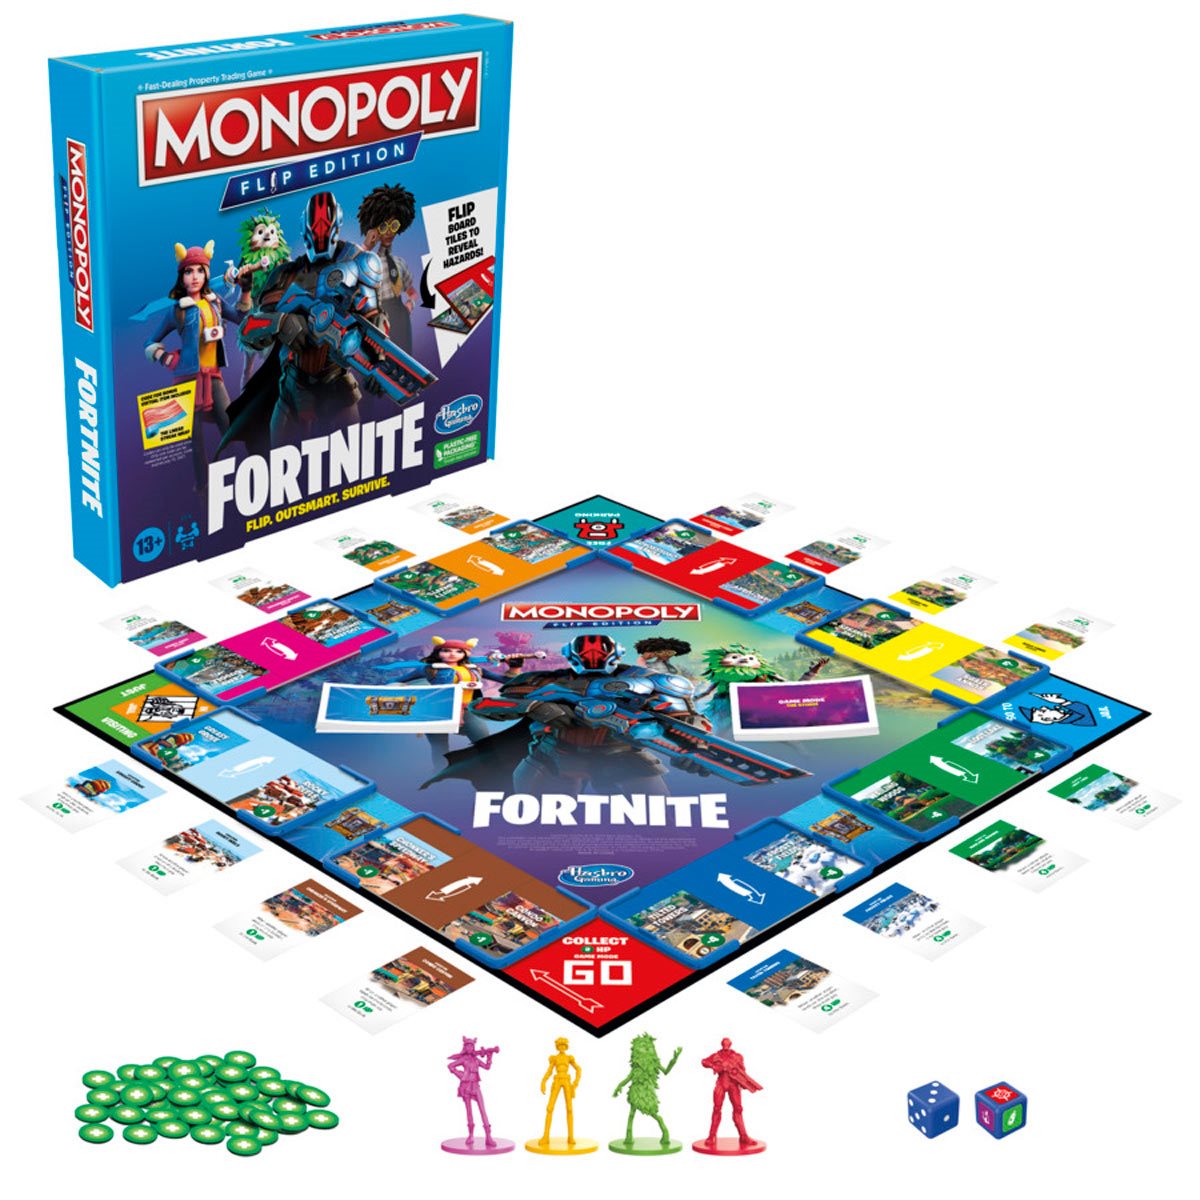 Monopoly - Fortnite Edition - board game - Epic Games / Hasbro - used